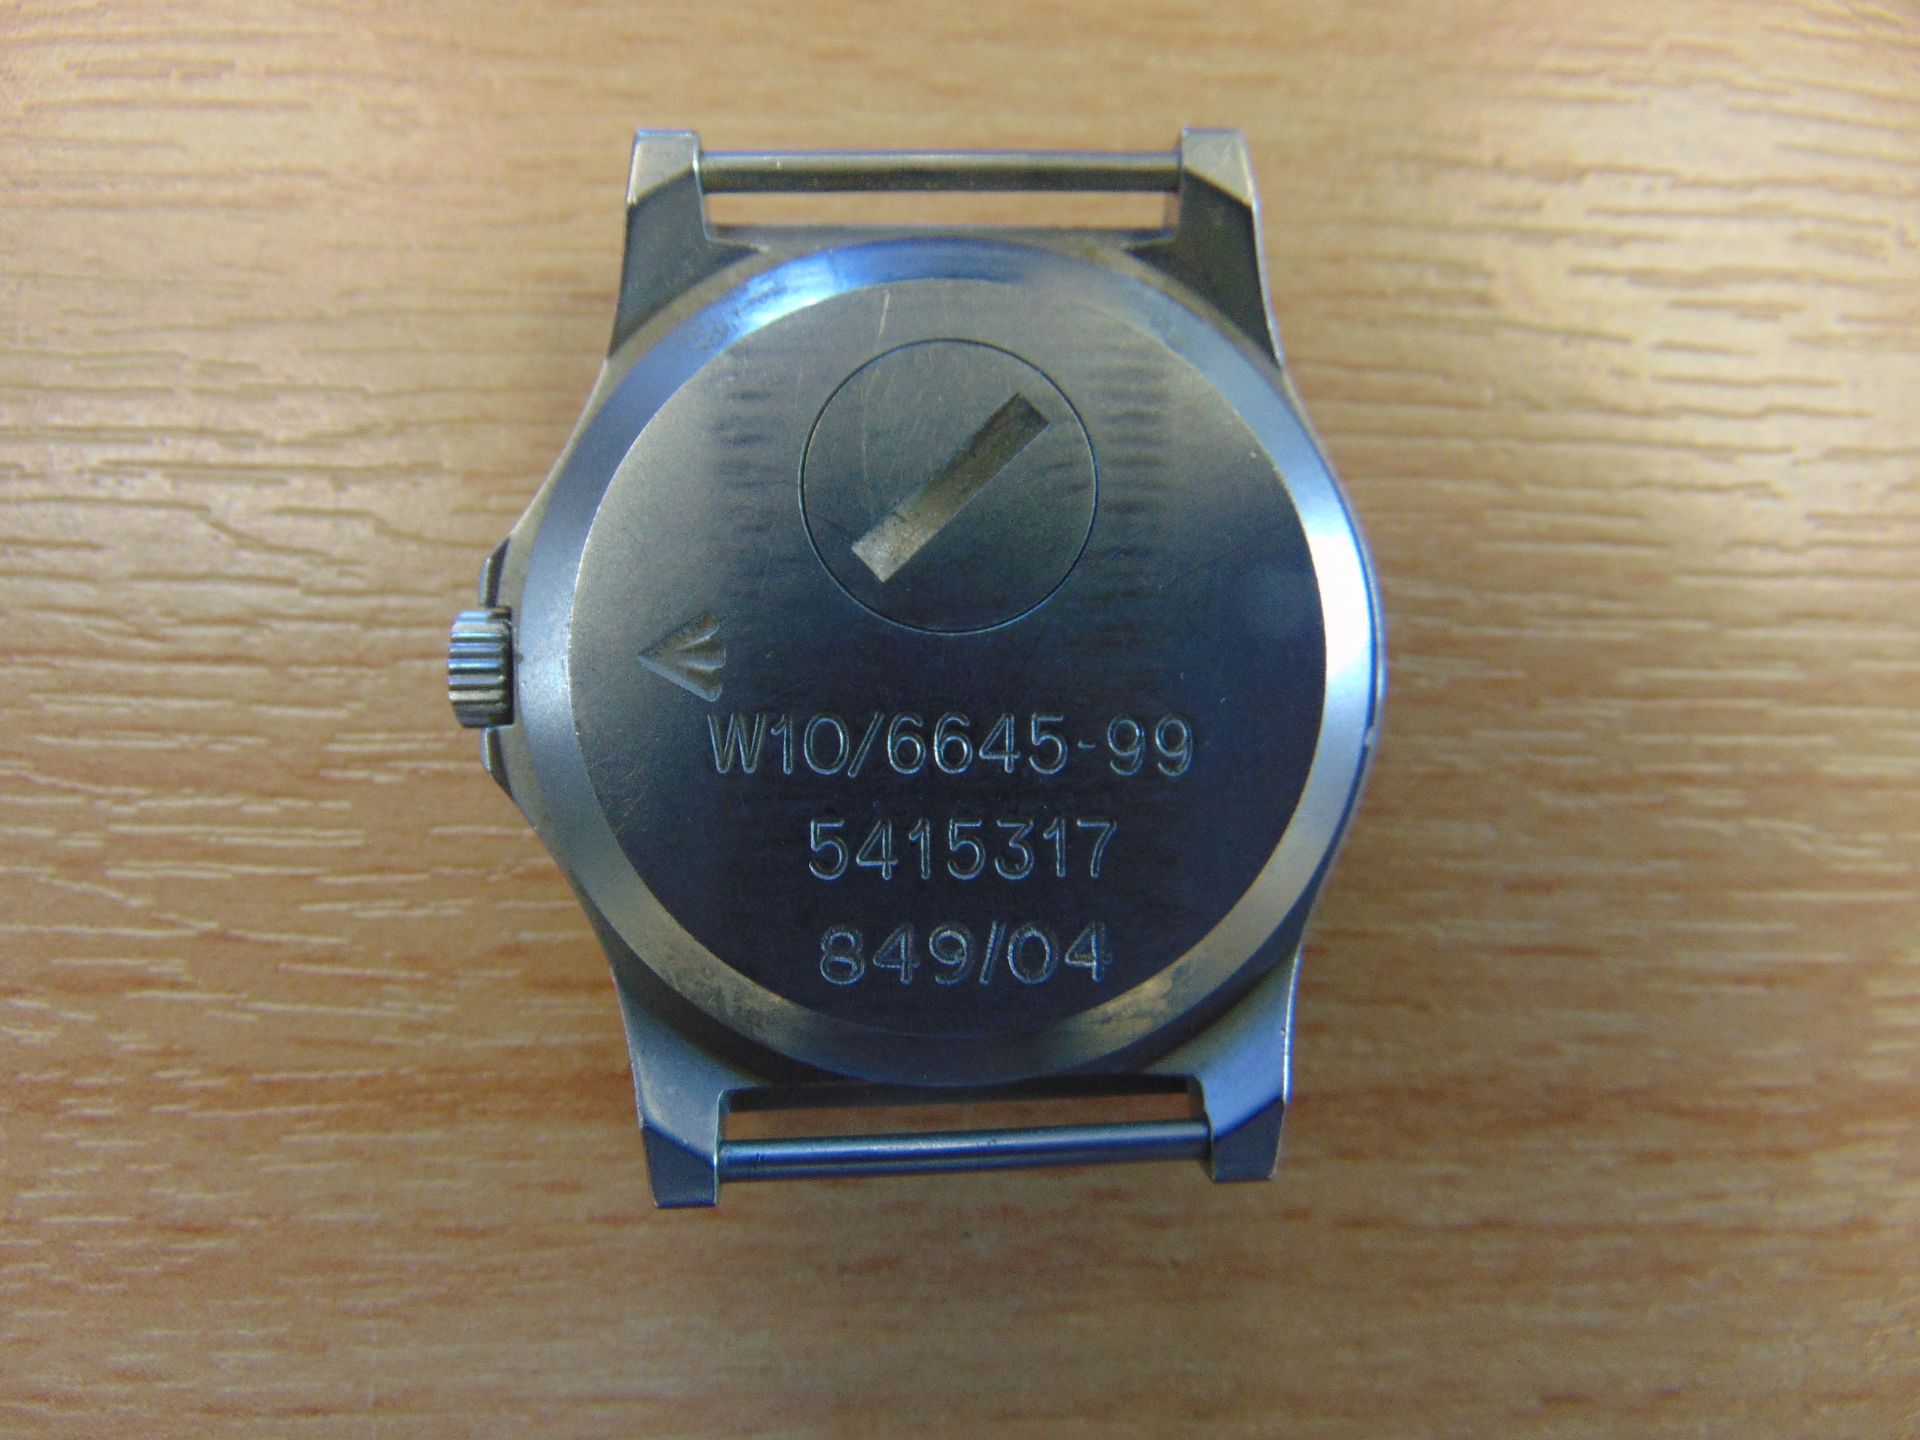 CWC (Cabot Watch Co Switzerland) British Army W10 Service Watch Nato Marks, Low Serial No 849 - Image 4 of 5